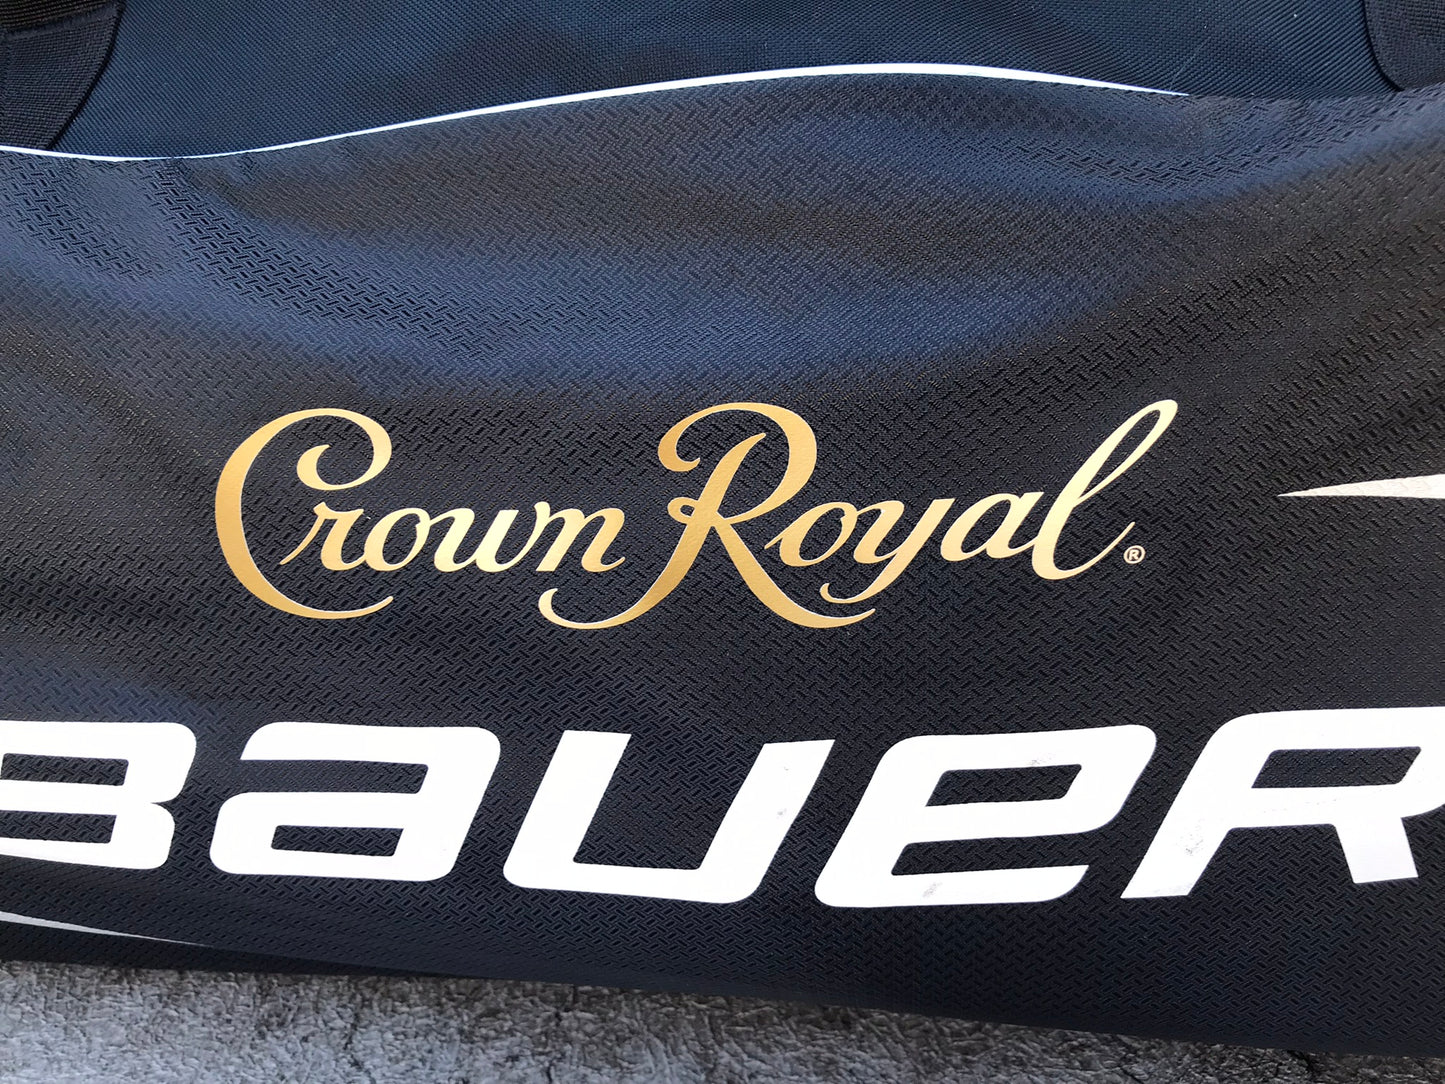 Hockey Bag Very RARE Collectable Crown Royal Whisky Promotional Bag on Wheels